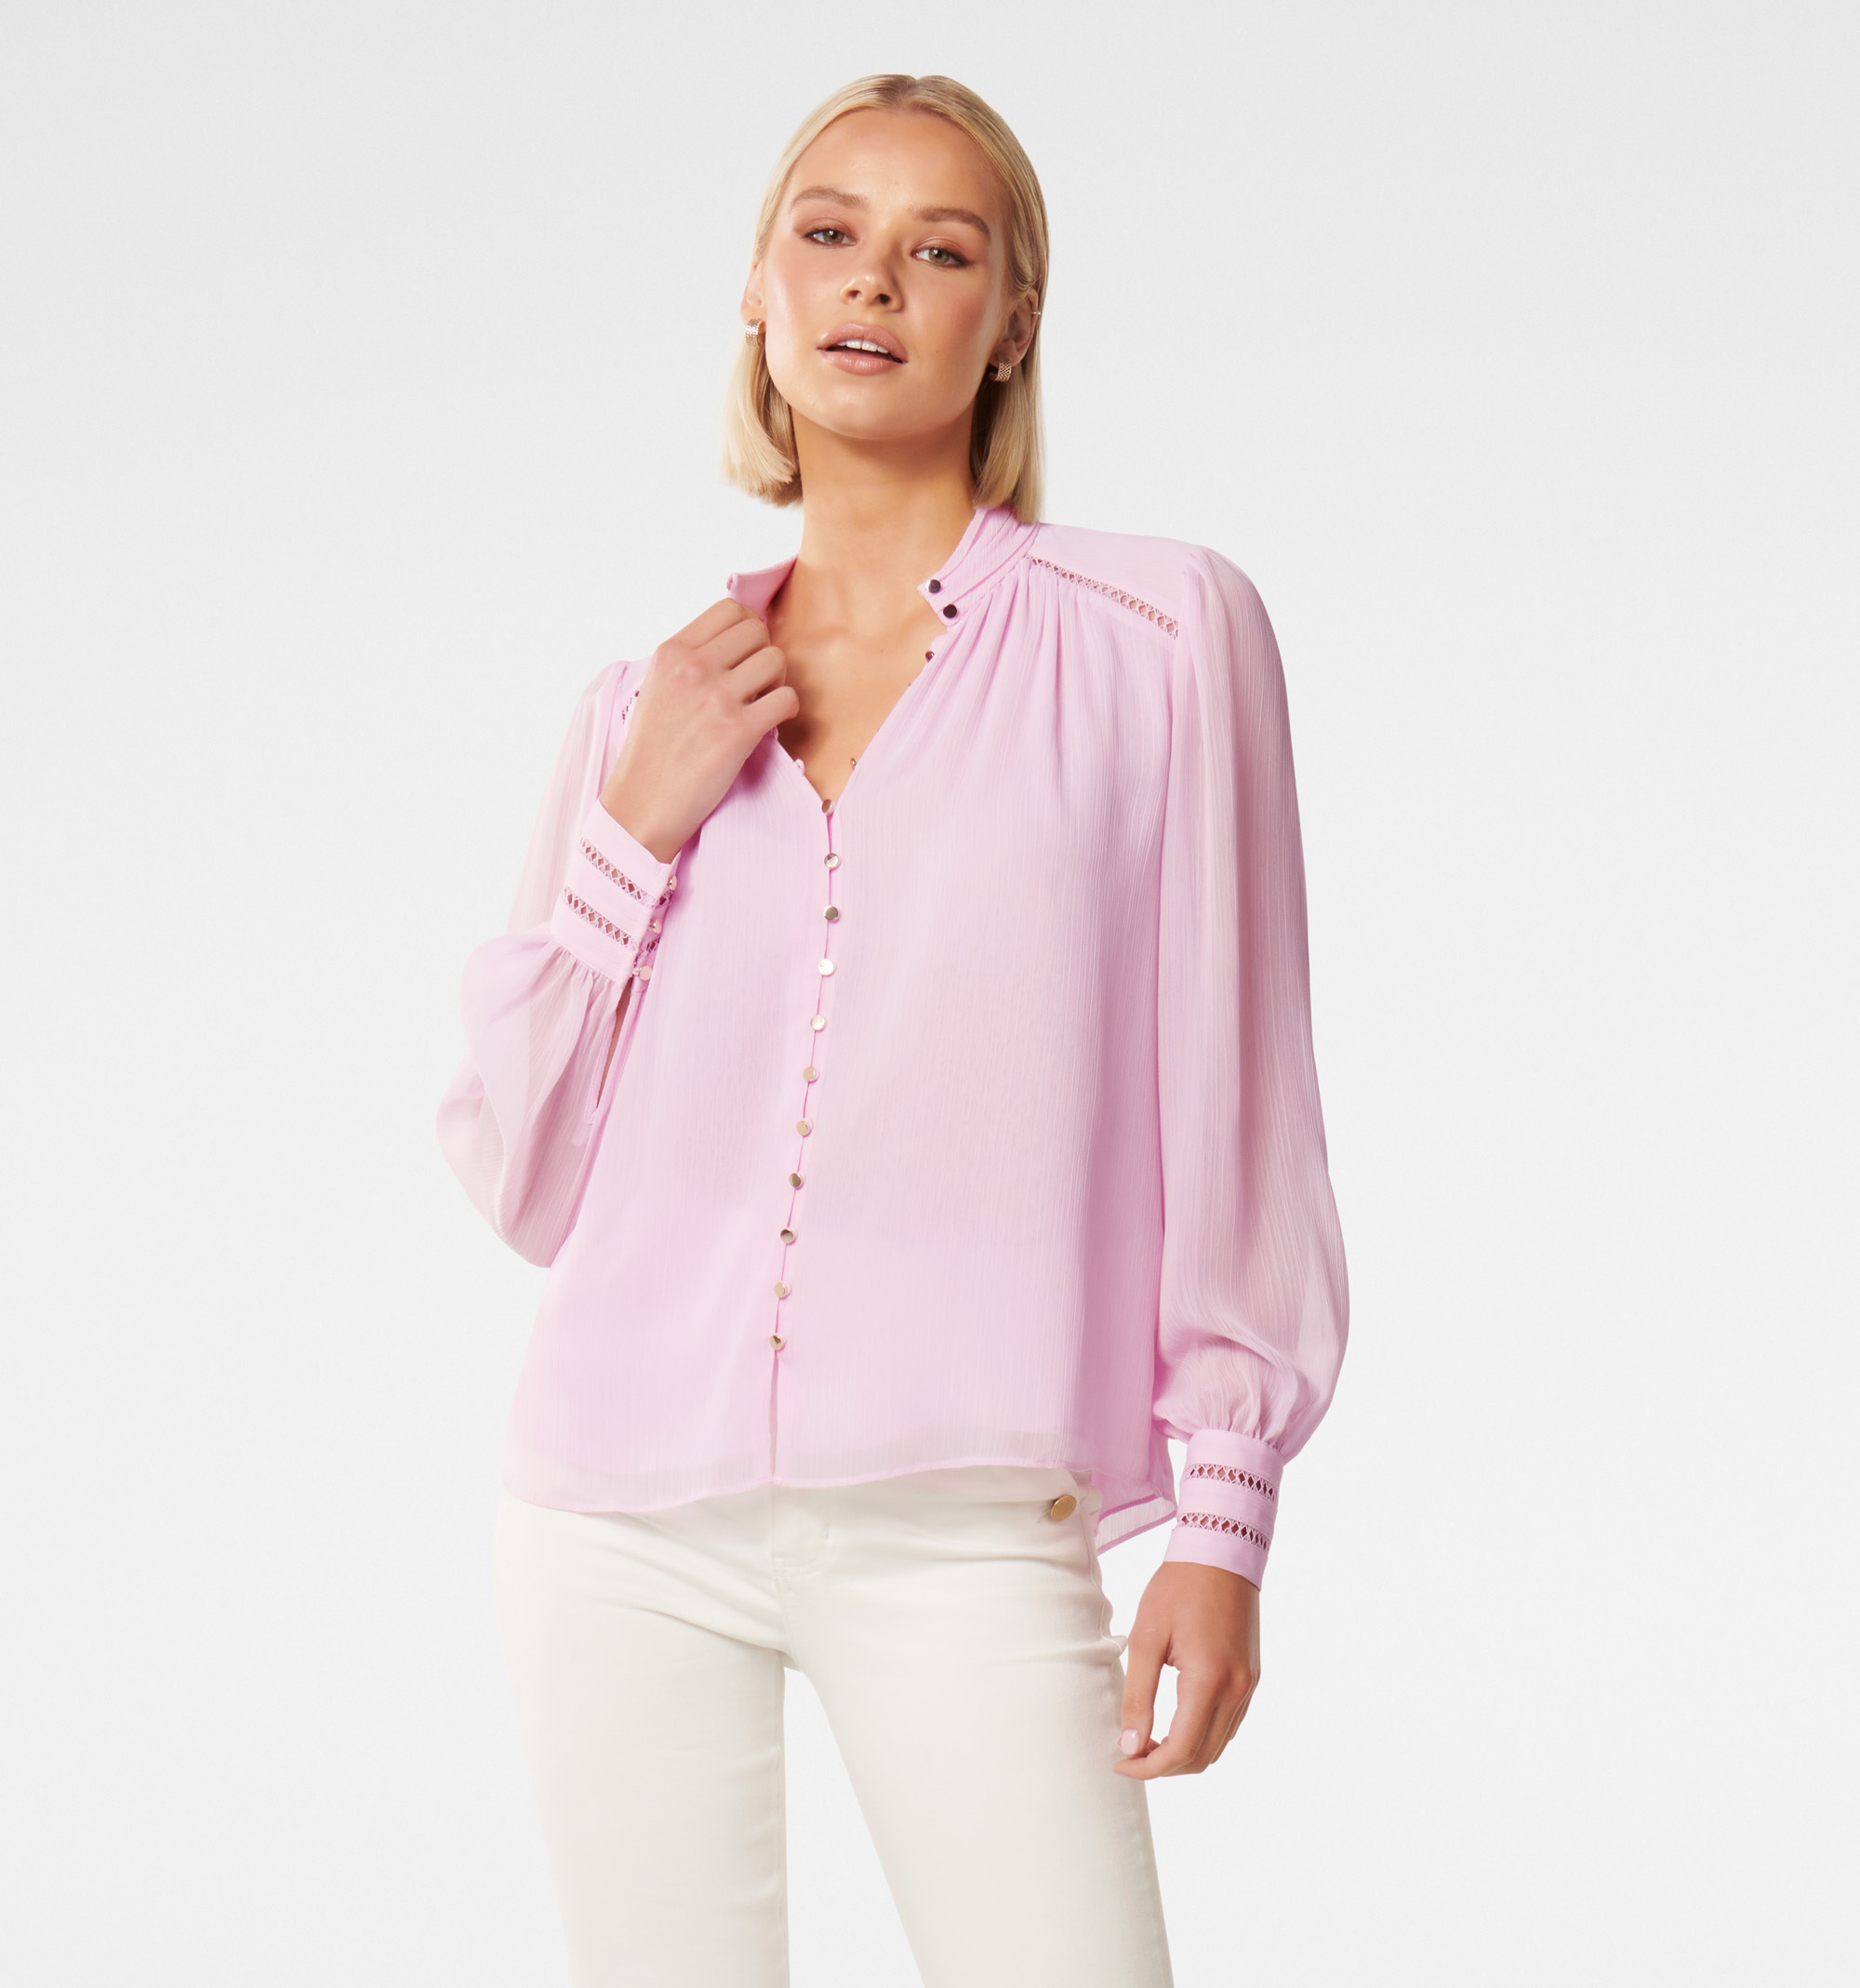 Buy Tainted Lavender Brielle Trim Spliced Blouse - Forever New